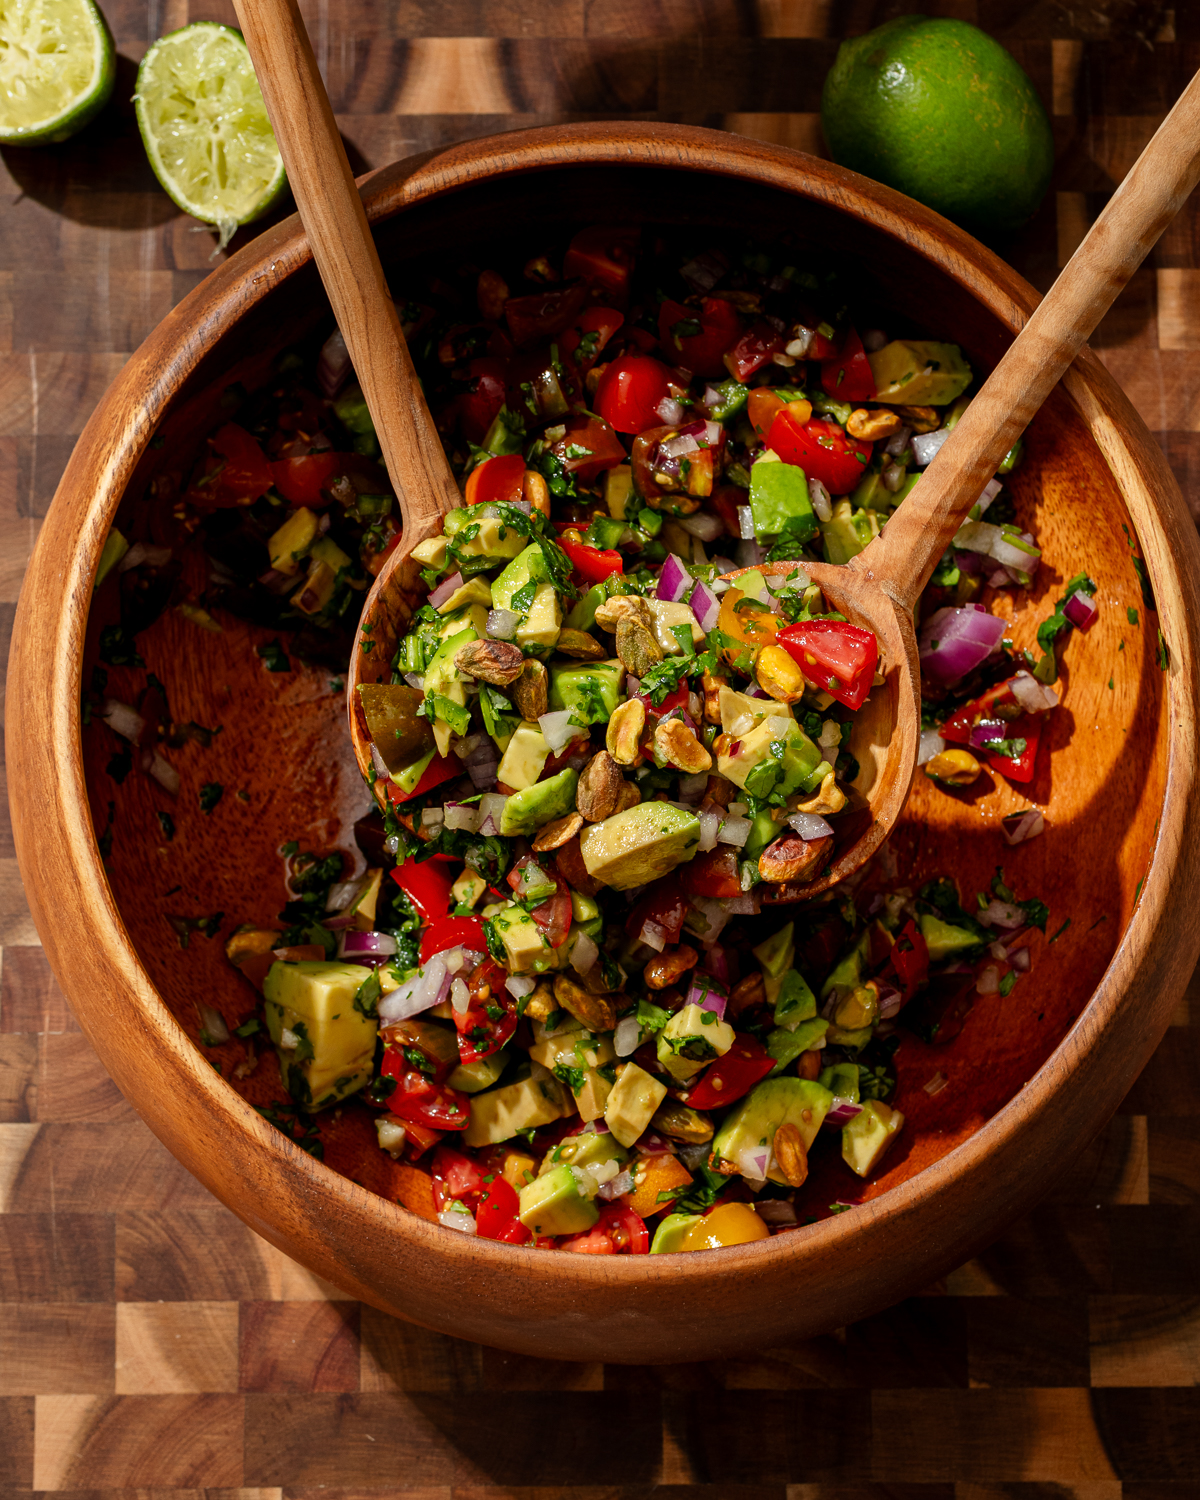 Creamy avocado salsa in a wooden bowl with salad spoons.